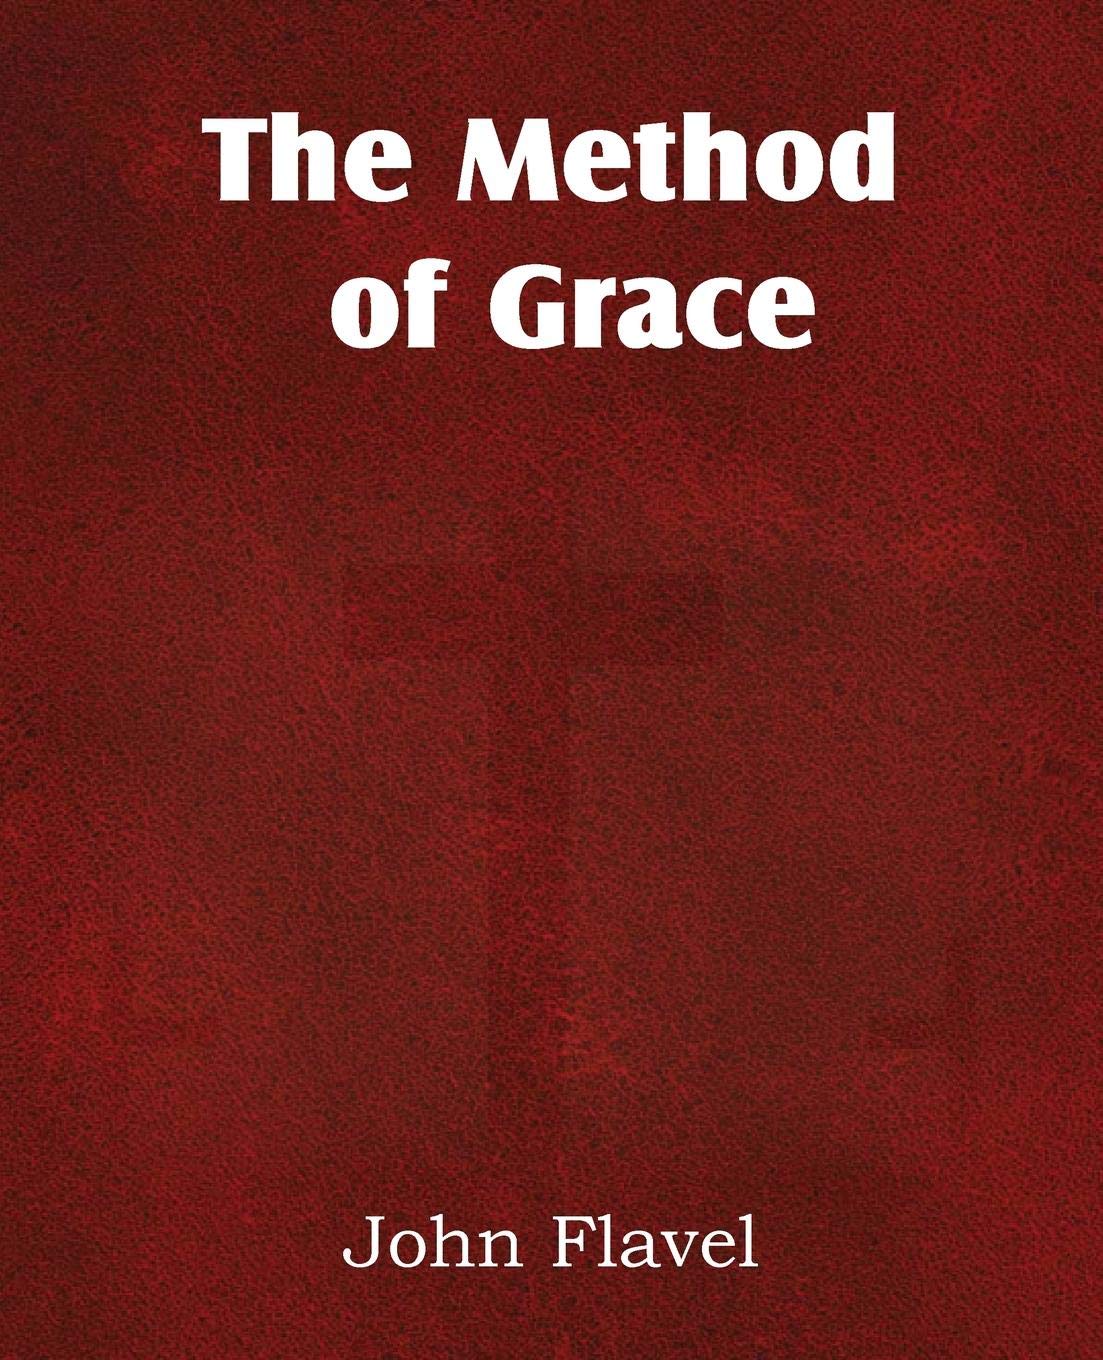 The method of grace